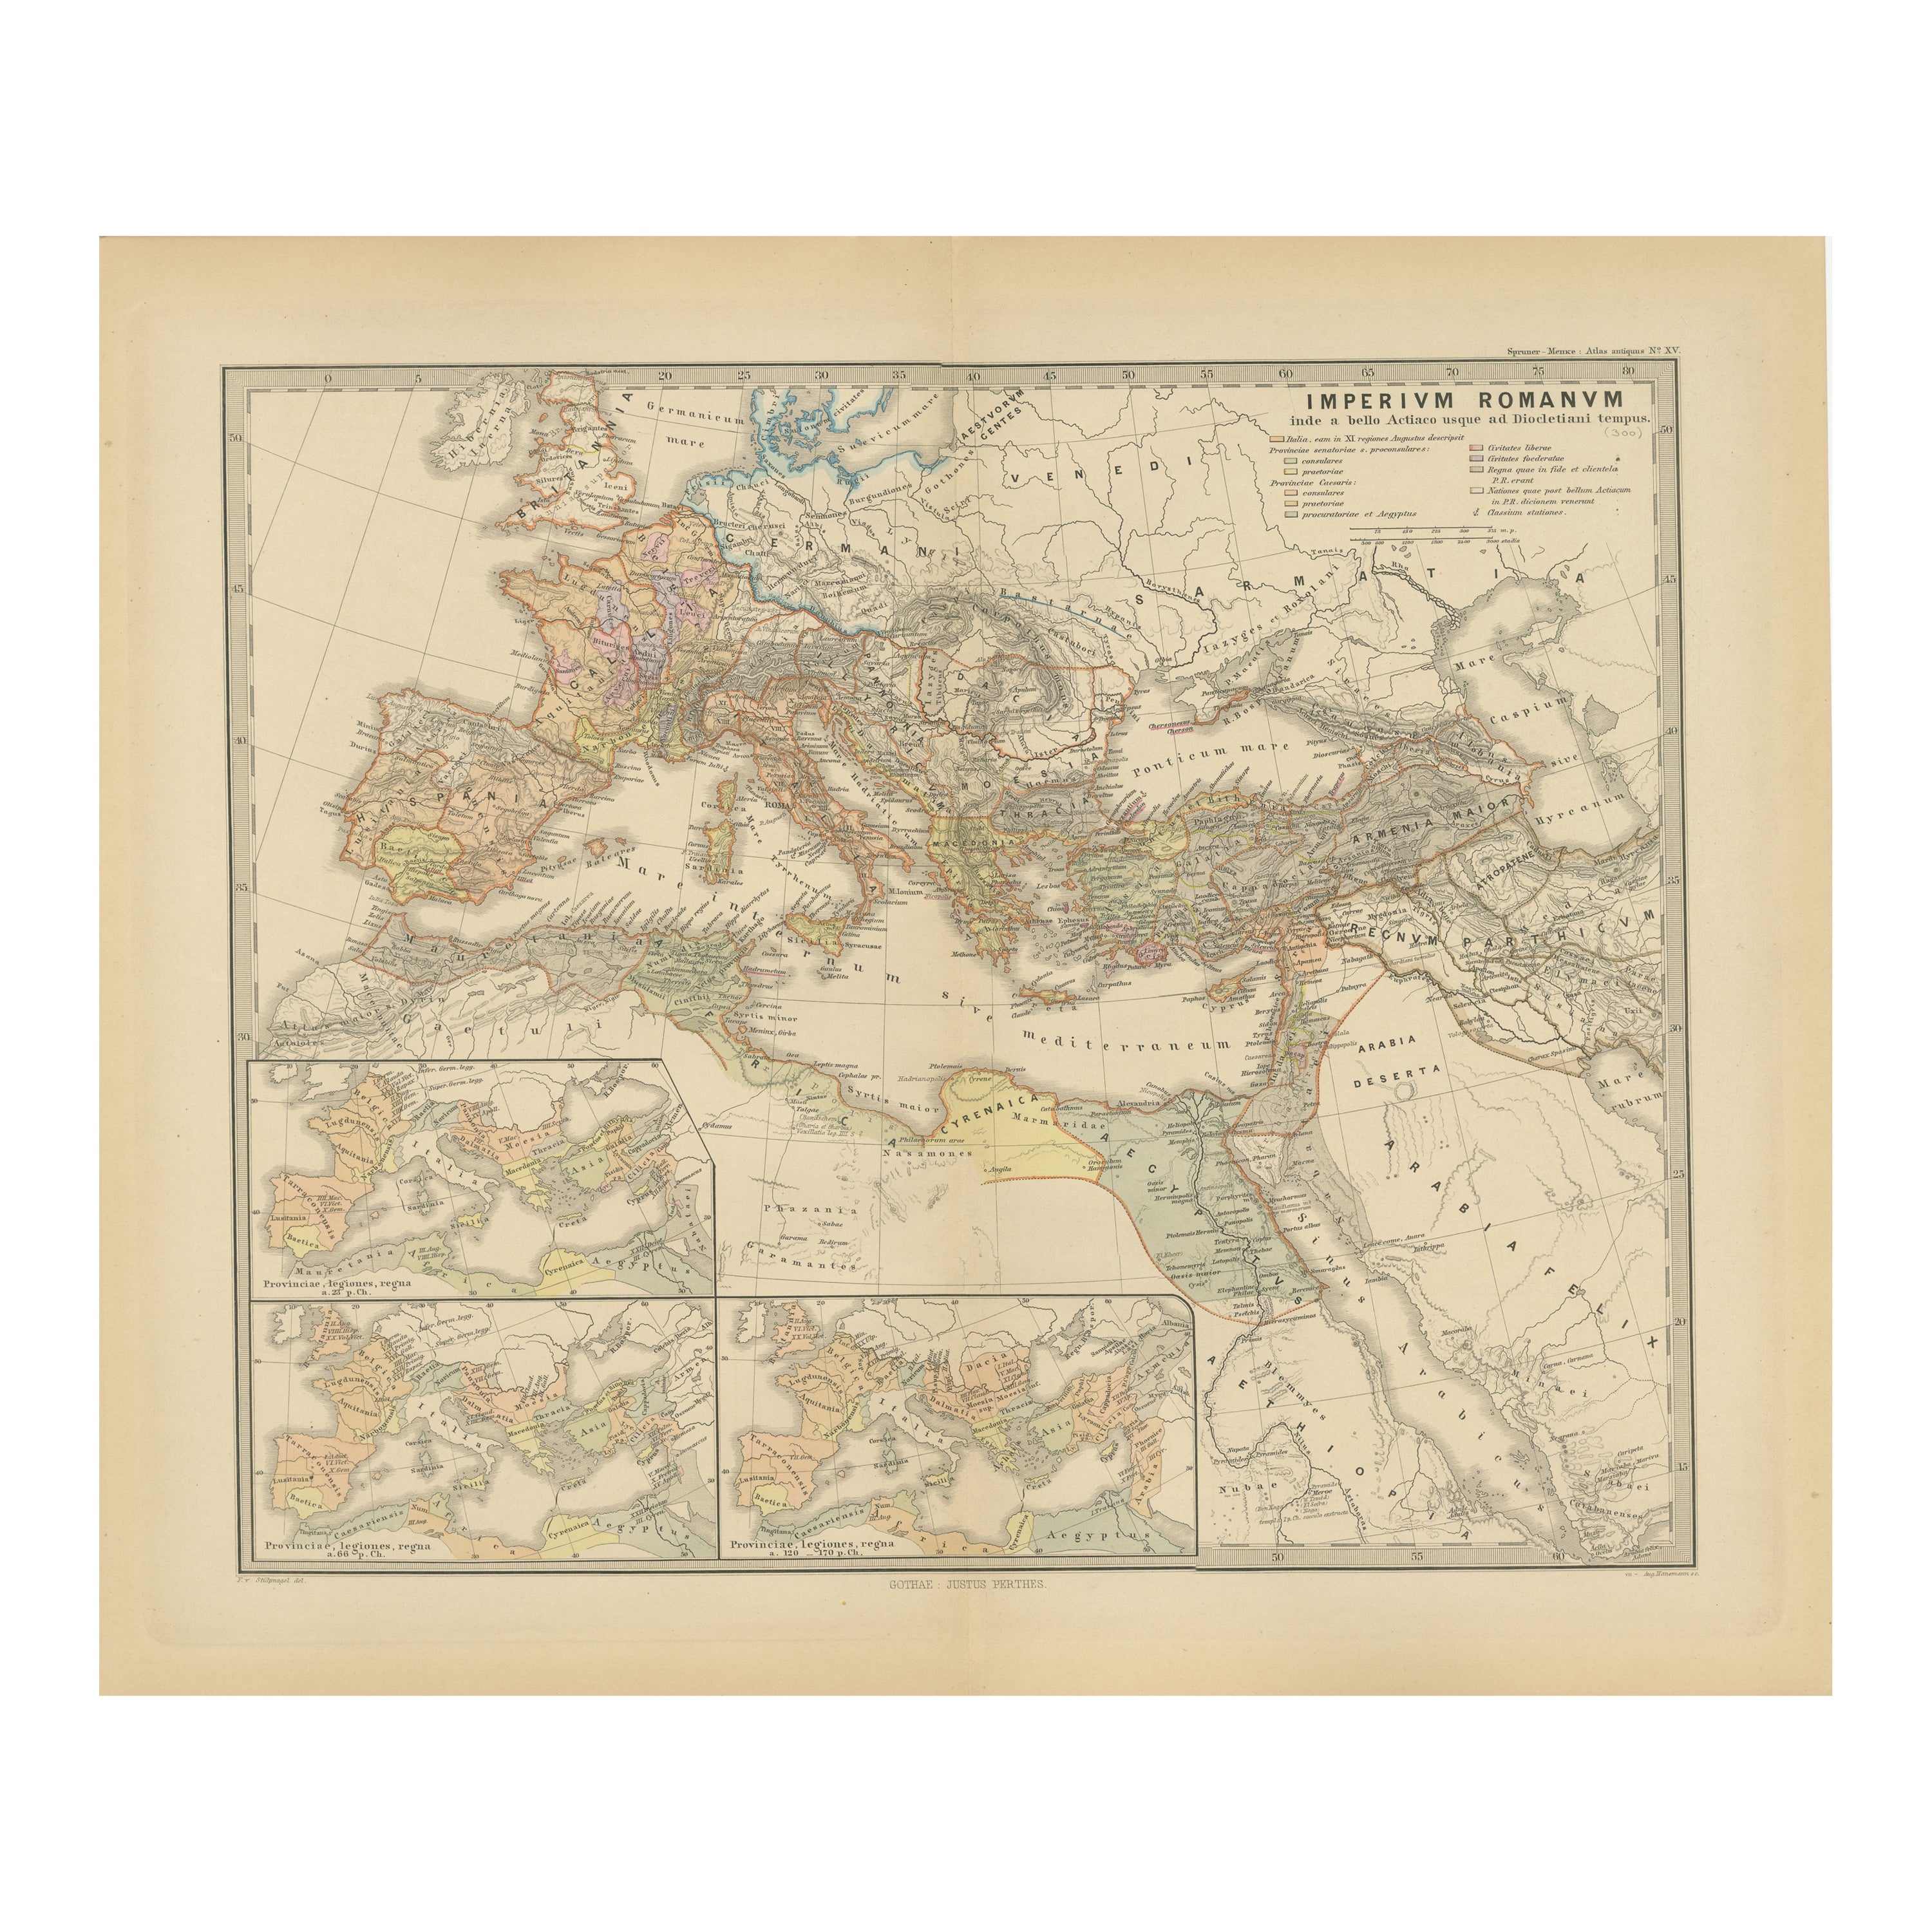 Imperium Romanum: A Detailed Map of the Roman Empire in its Zenith, 1880 For Sale